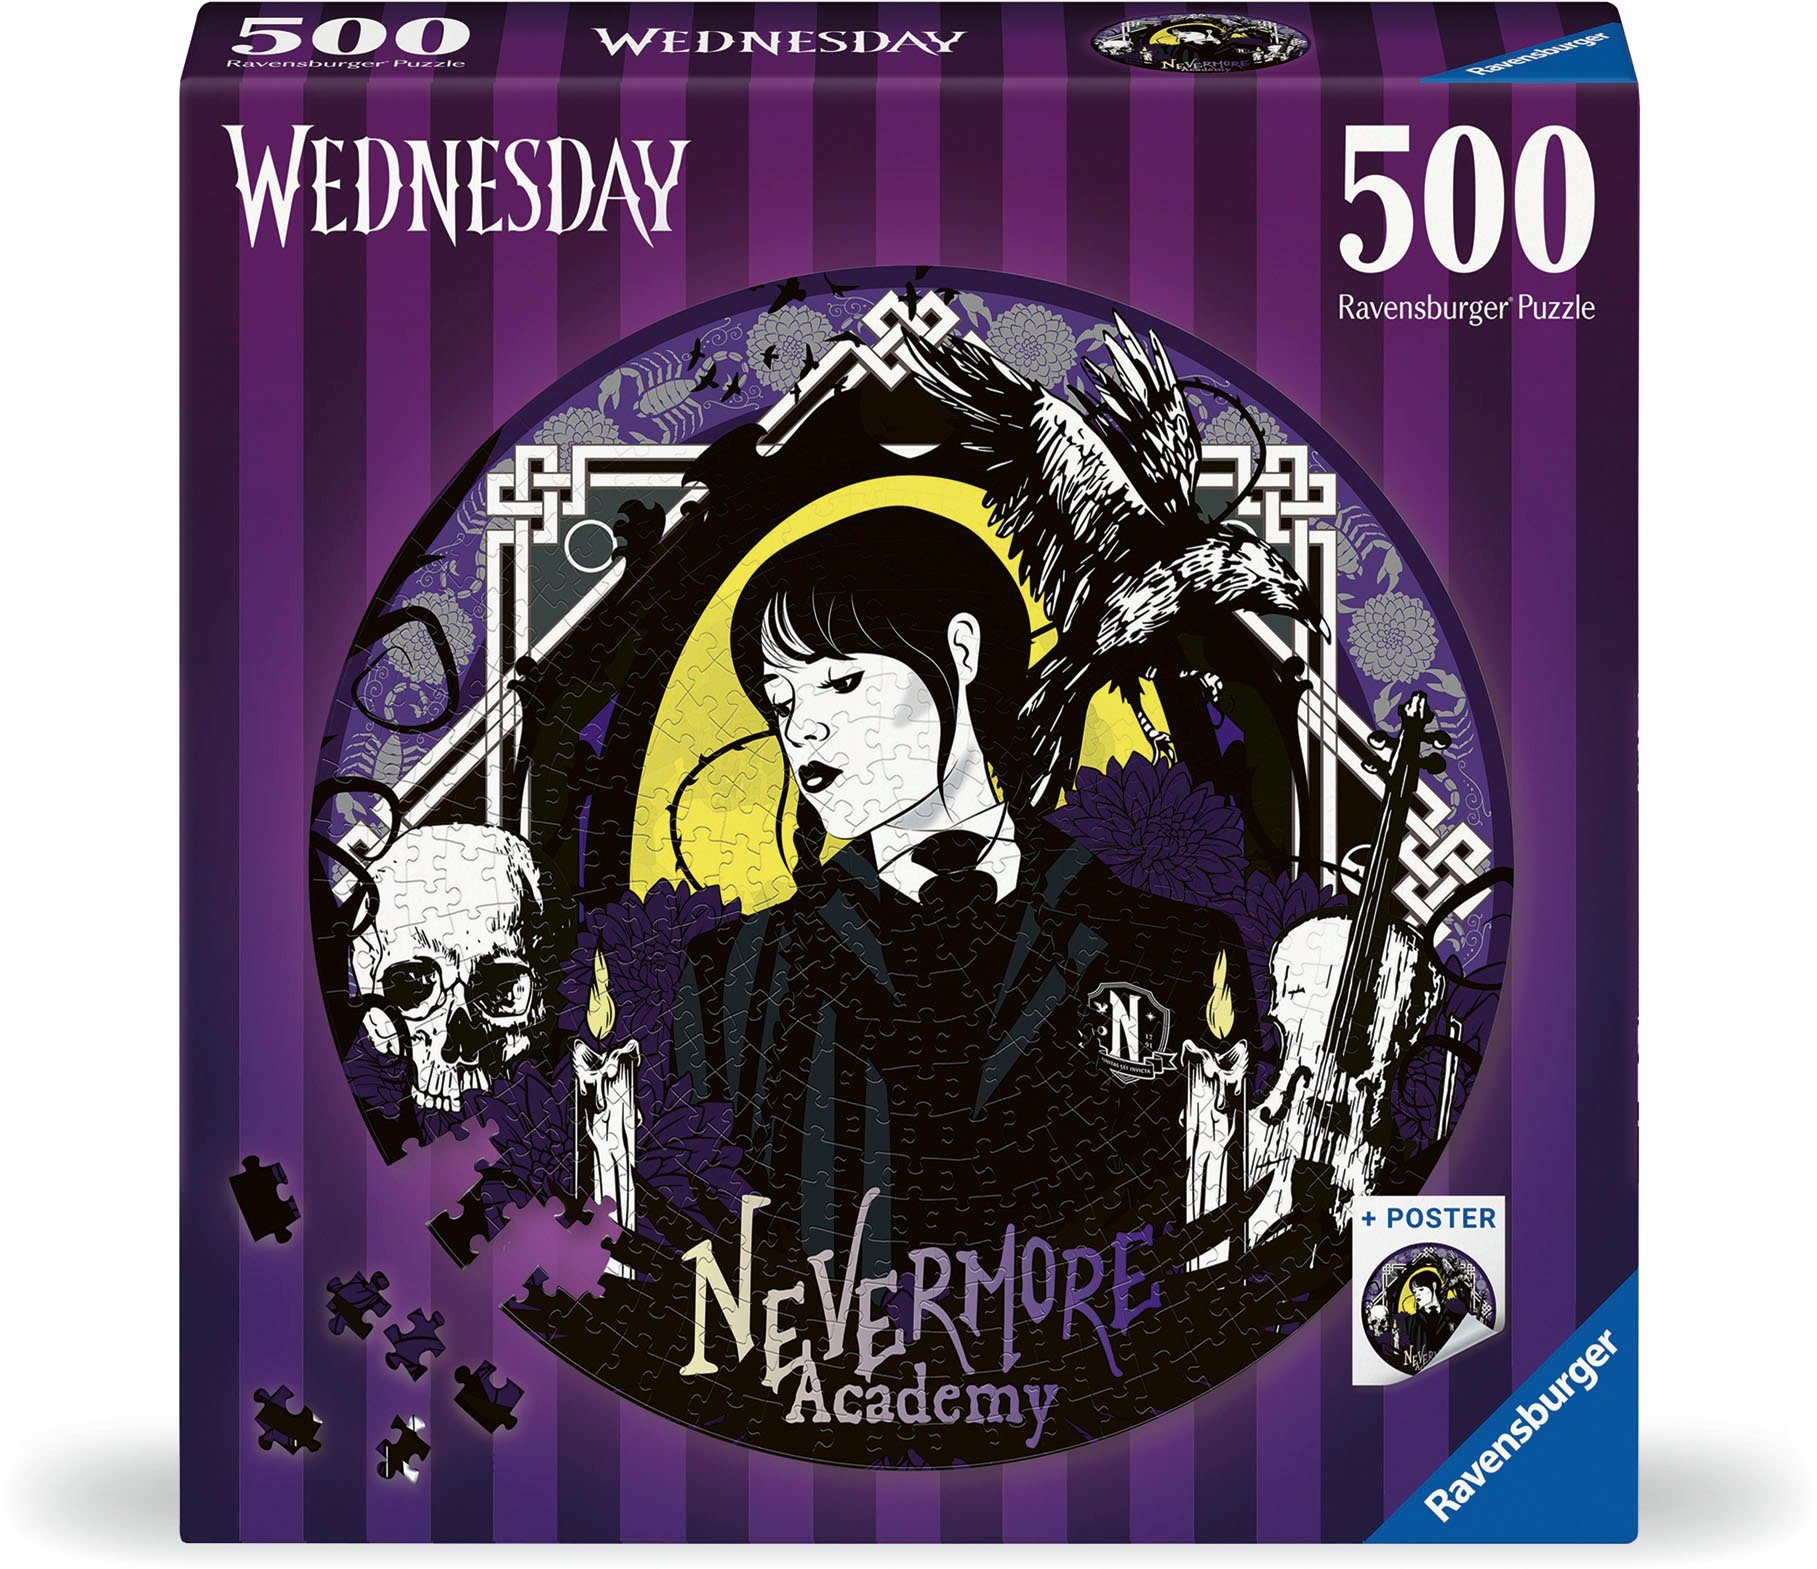 Ravensburger Puzzle Wednesday, 500 Puzzleteile, Made in Europe